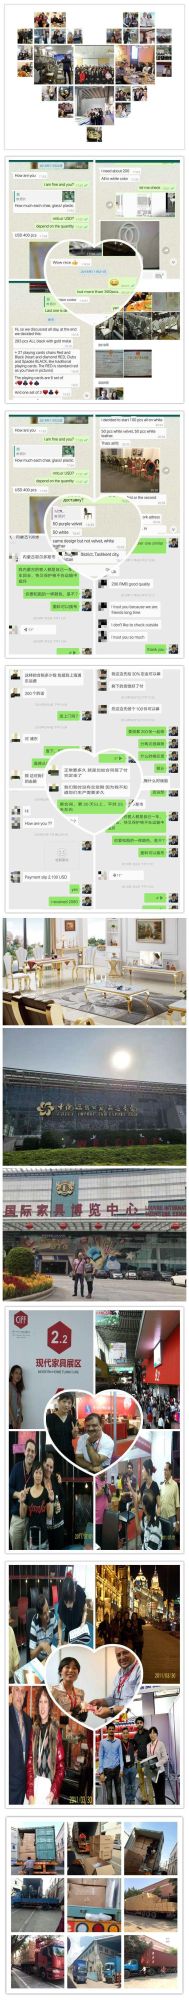 White Clear Transparent Plastic Resin PC Event Wedding Chair Table Set Event Furniture Gold PP Pheonix Dining Chairs